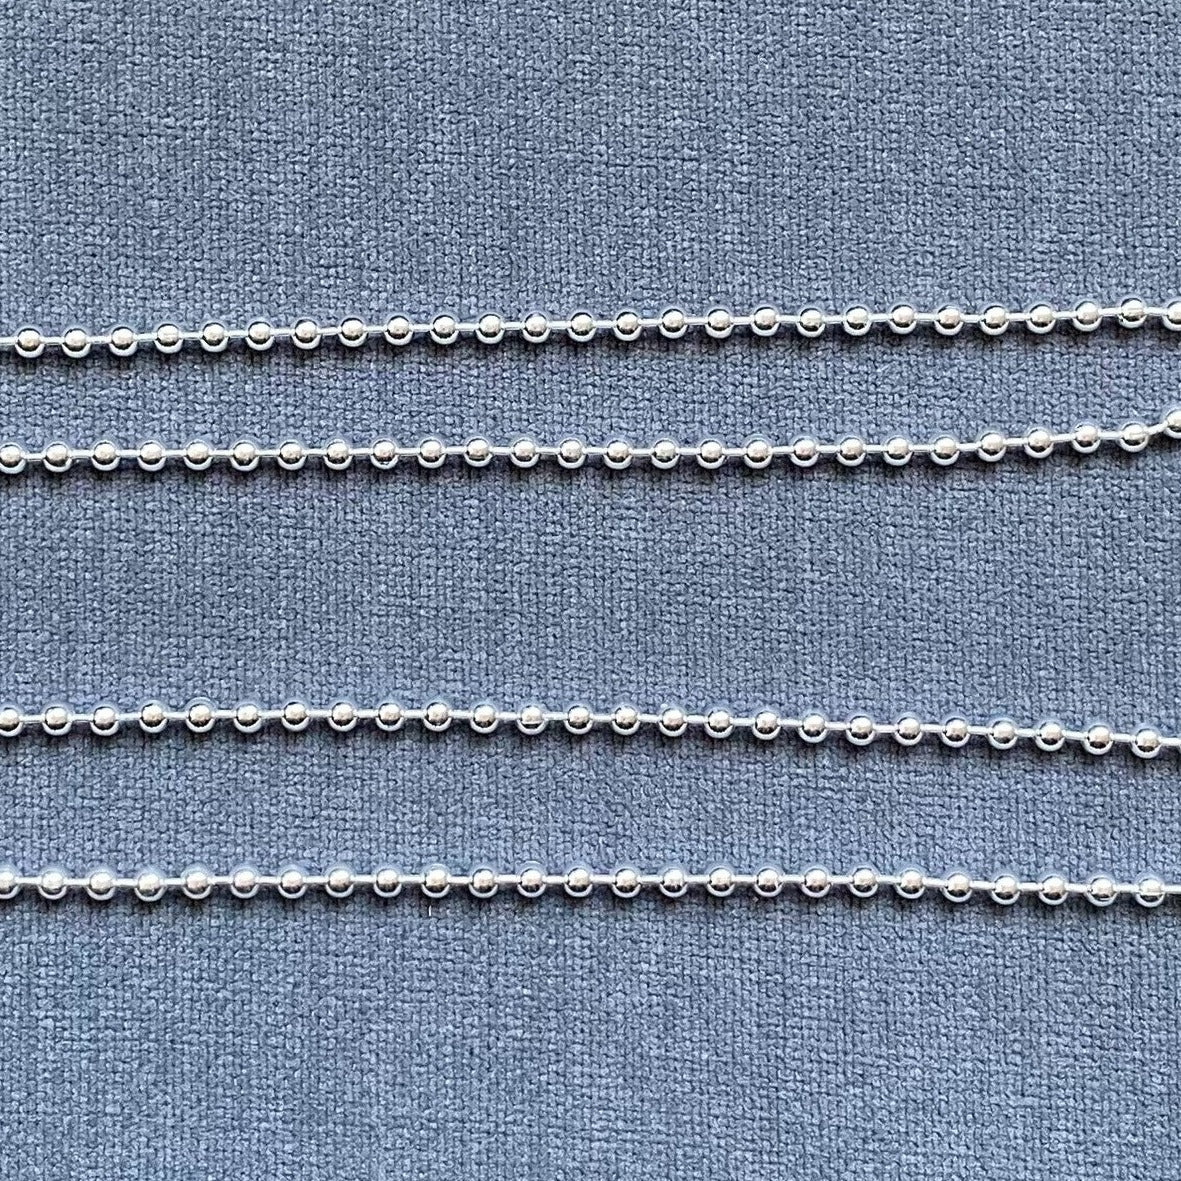 Ball Chain Necklace 50cm